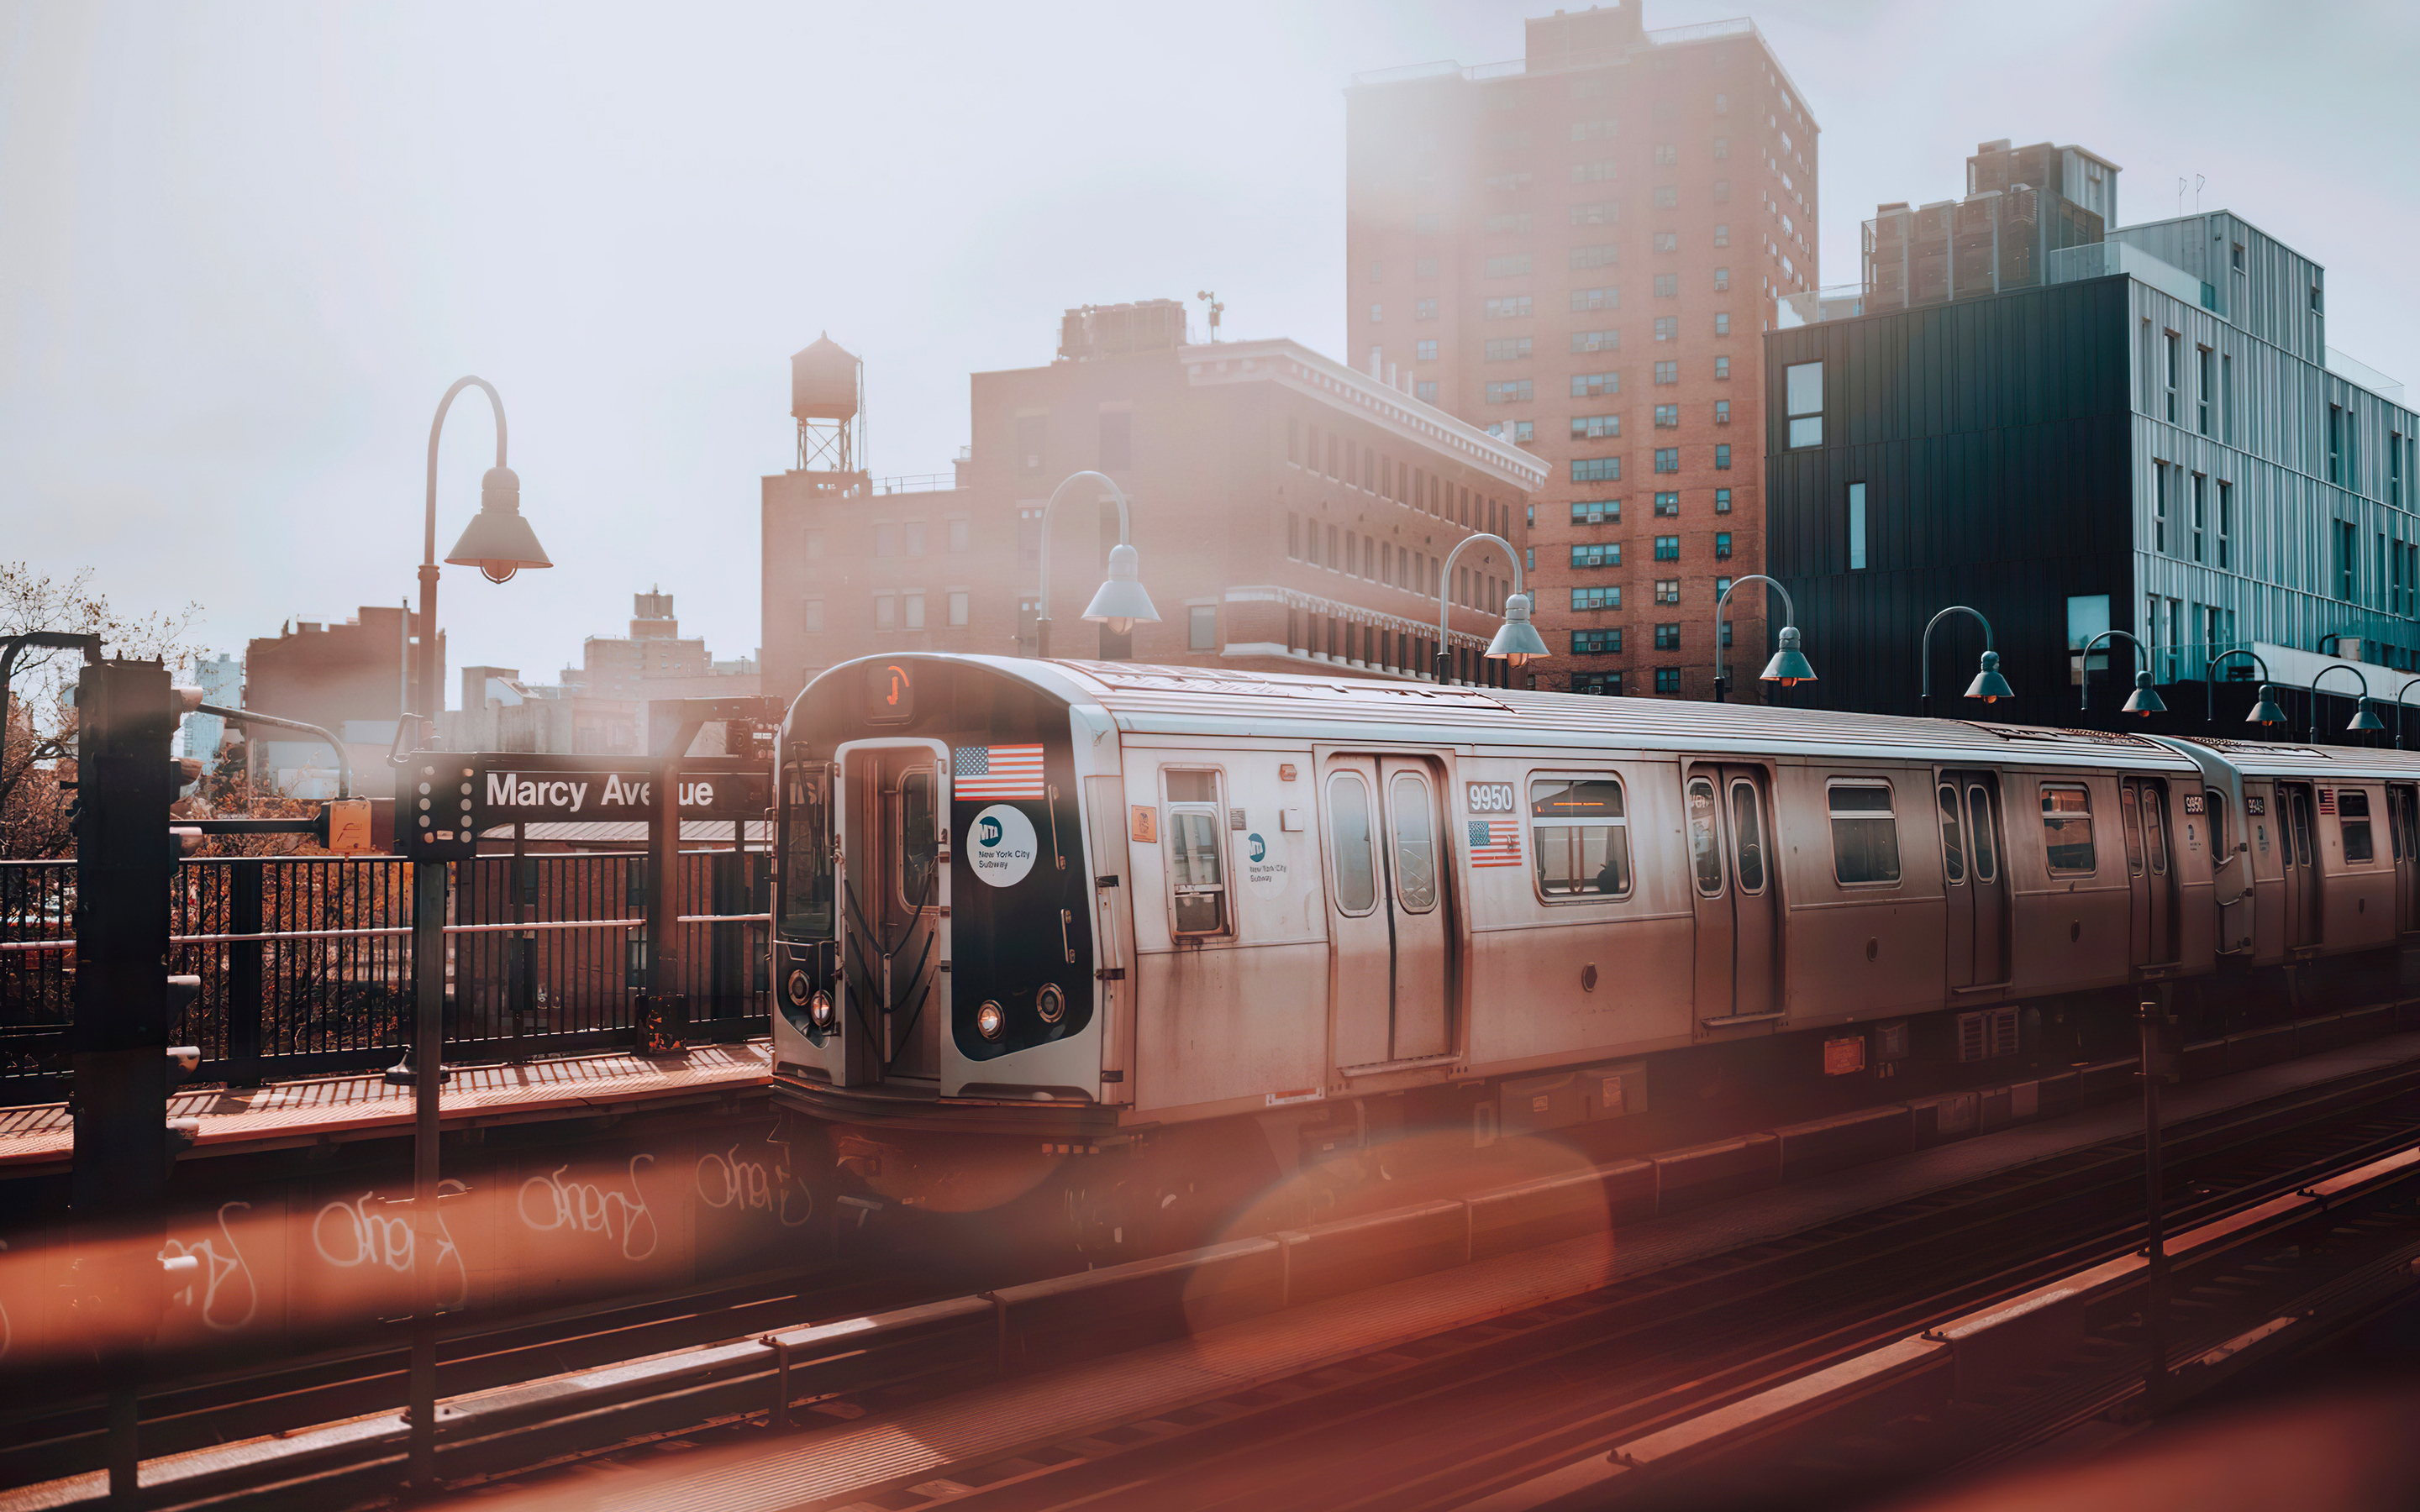 A train passing through a city with tall buildings in the background. - New York